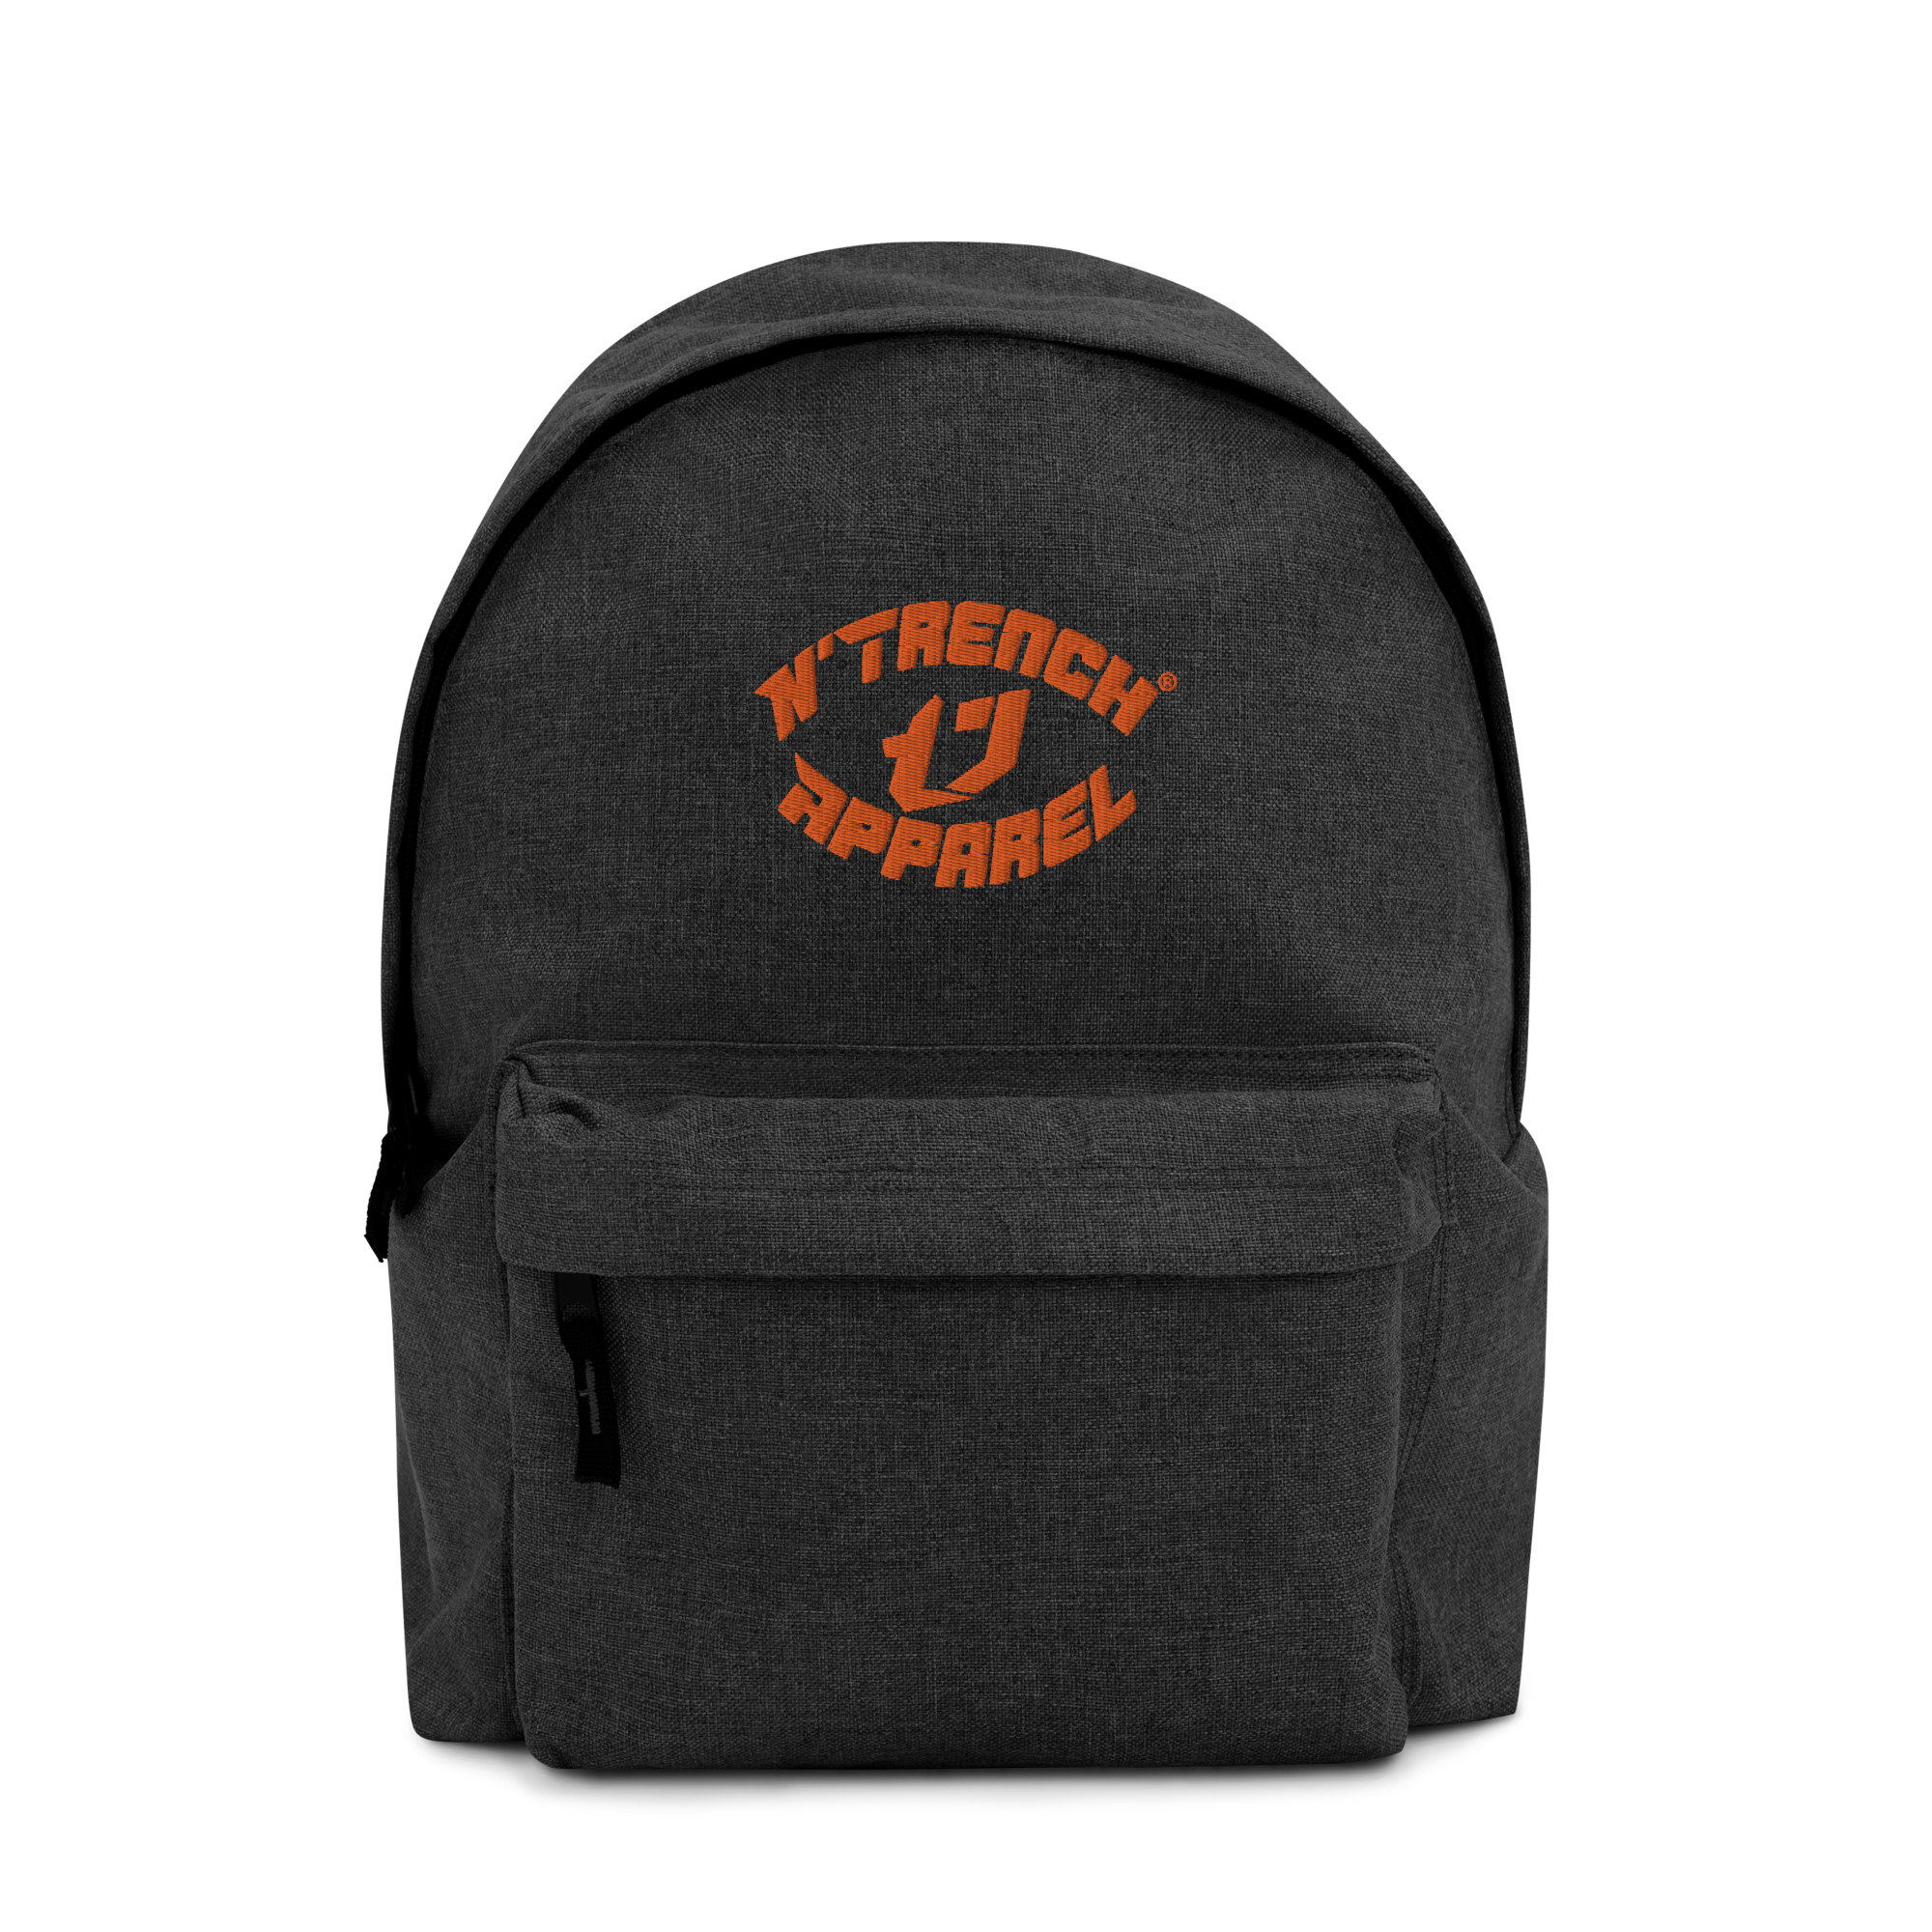 N'Trench Apparel Orange Lettering And Logo Embroidered Backpack